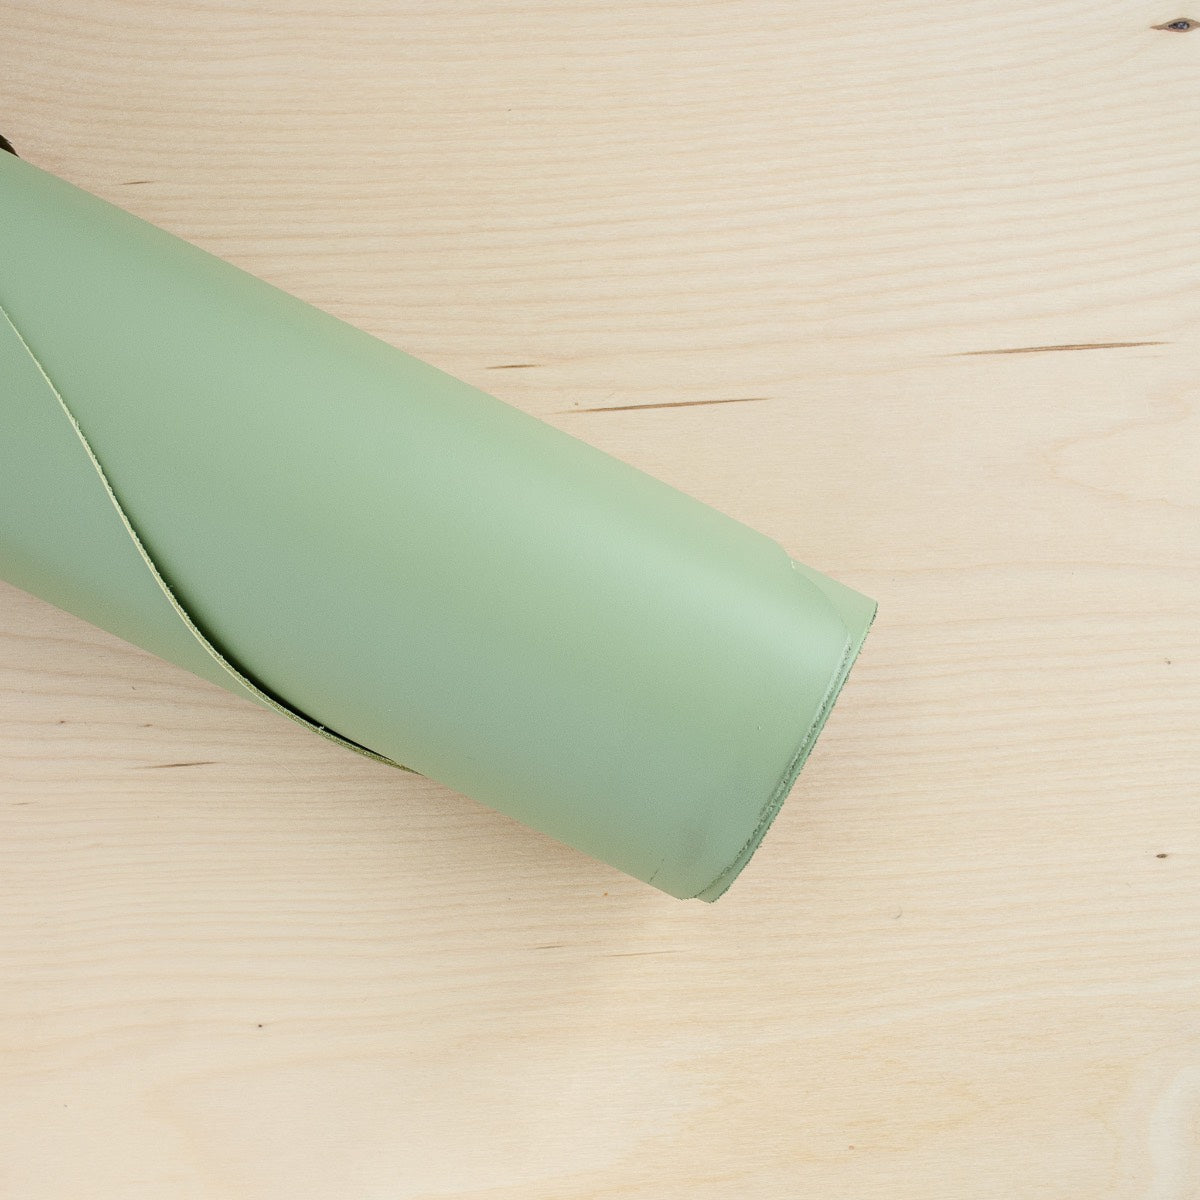 Sage green leather on a roll for sage green clutch bags.